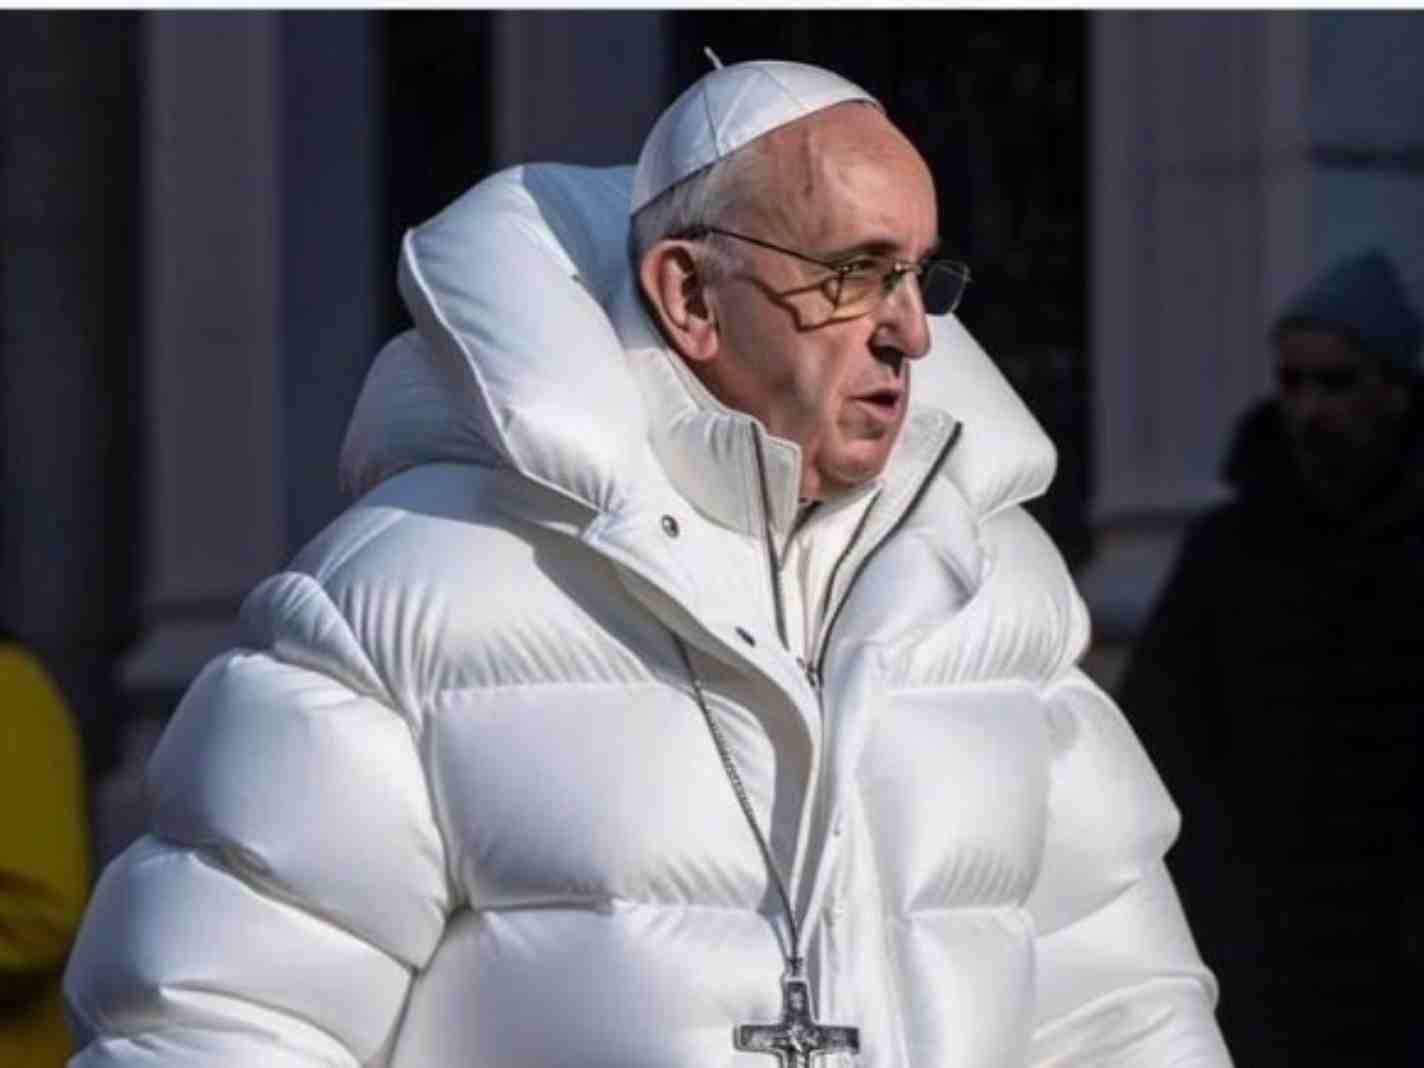 Mistaking This Photo Of Pope In A Puffer Jacket For Real Points To A Scary Future